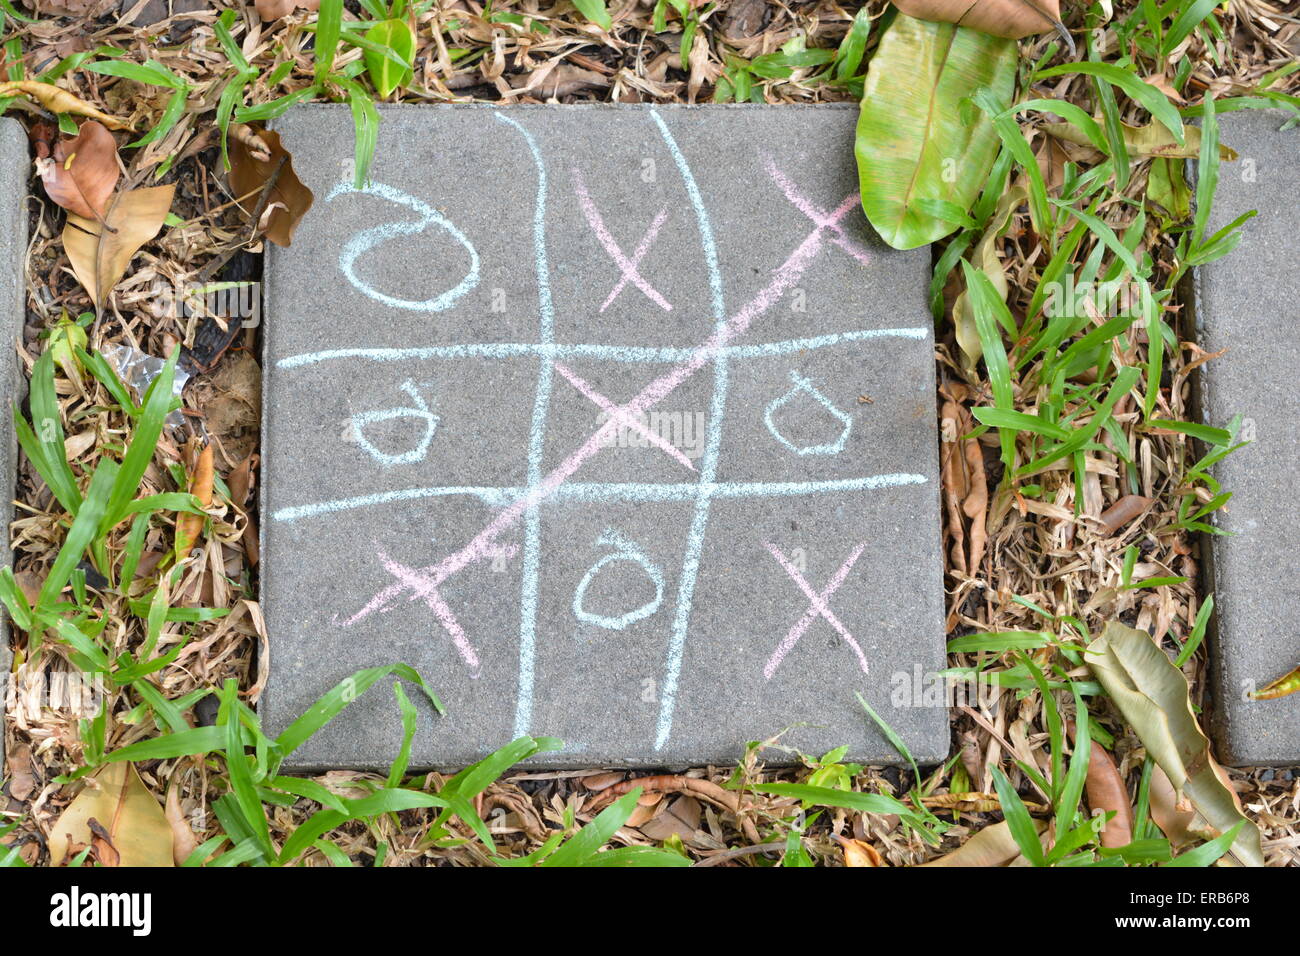 Tic Tac Toe Game On A Garden Tile Stock Photo 83225360 Alamy